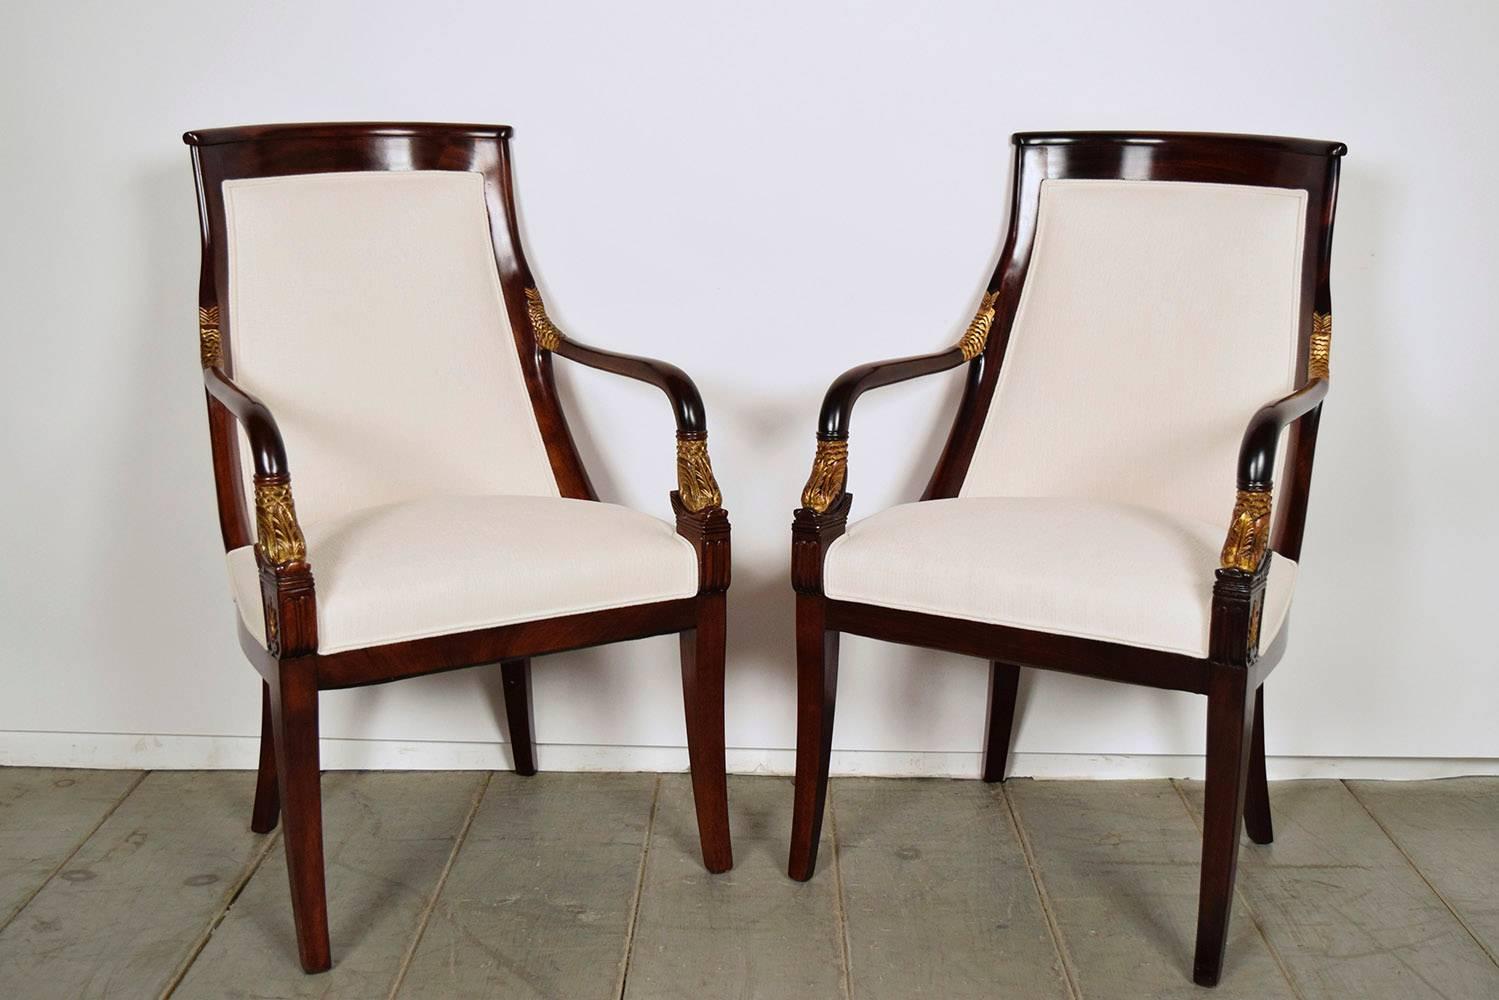 Set of 12 beautiful Regency-style mahogany dining chairs. Solid mahogany wood construction, with its original mahogany color finish and gilt accent color on the arms. Has elegant curved backs and stylish carved arms. All chairs have been newly